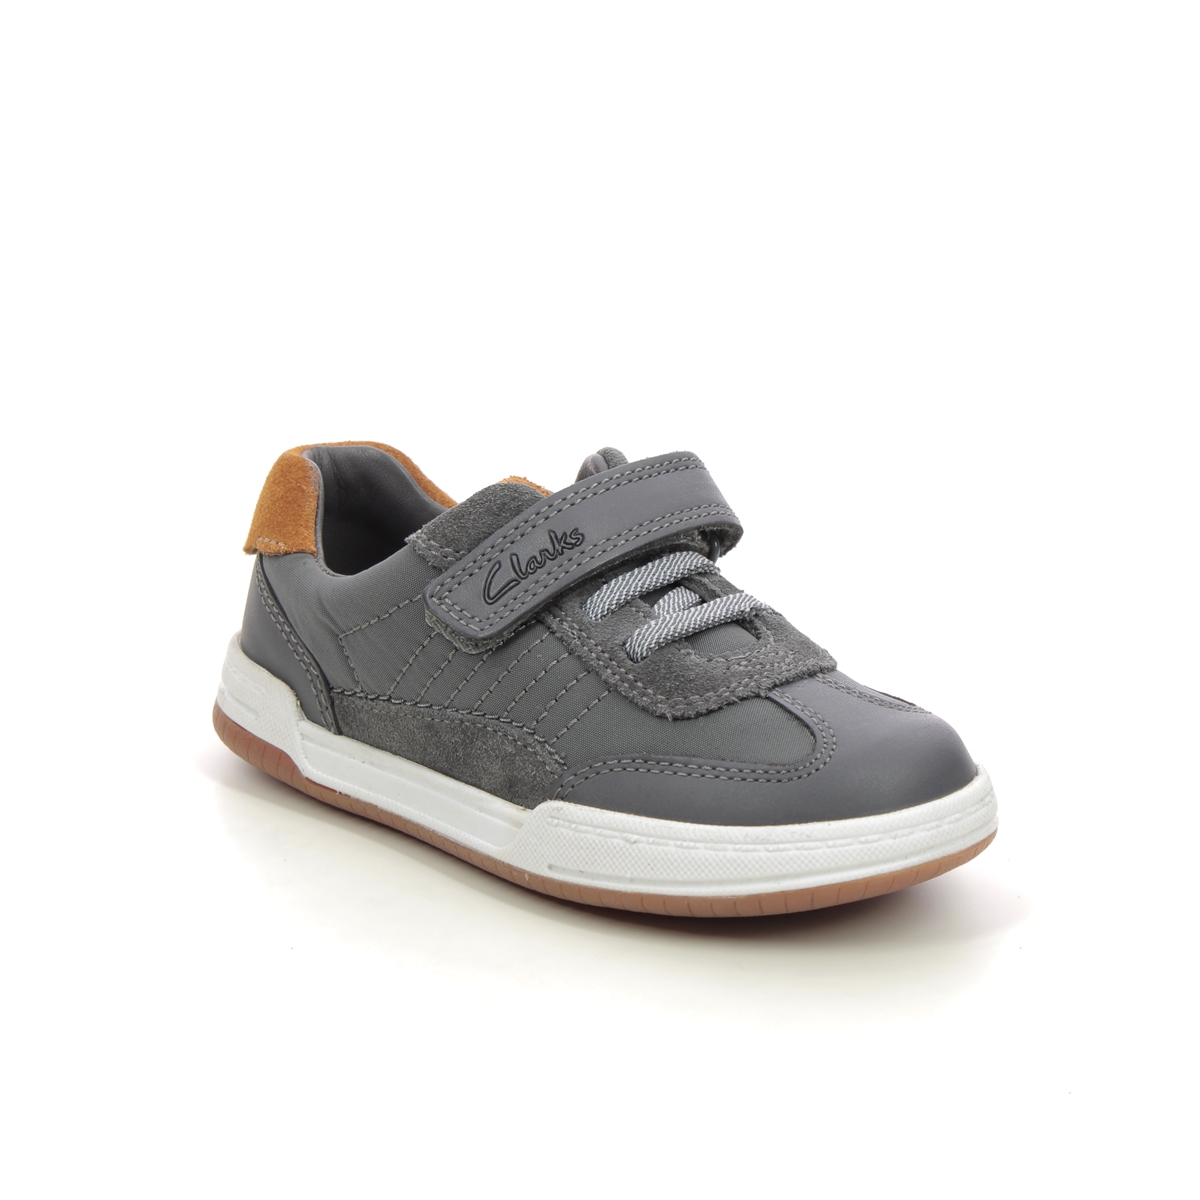 Clarks Fawn Family K Grey Leather Kids Boys Toddler Shoes 751156F In Size 9 In Plain Grey Leather F Width Fitting Regular Fit For kids